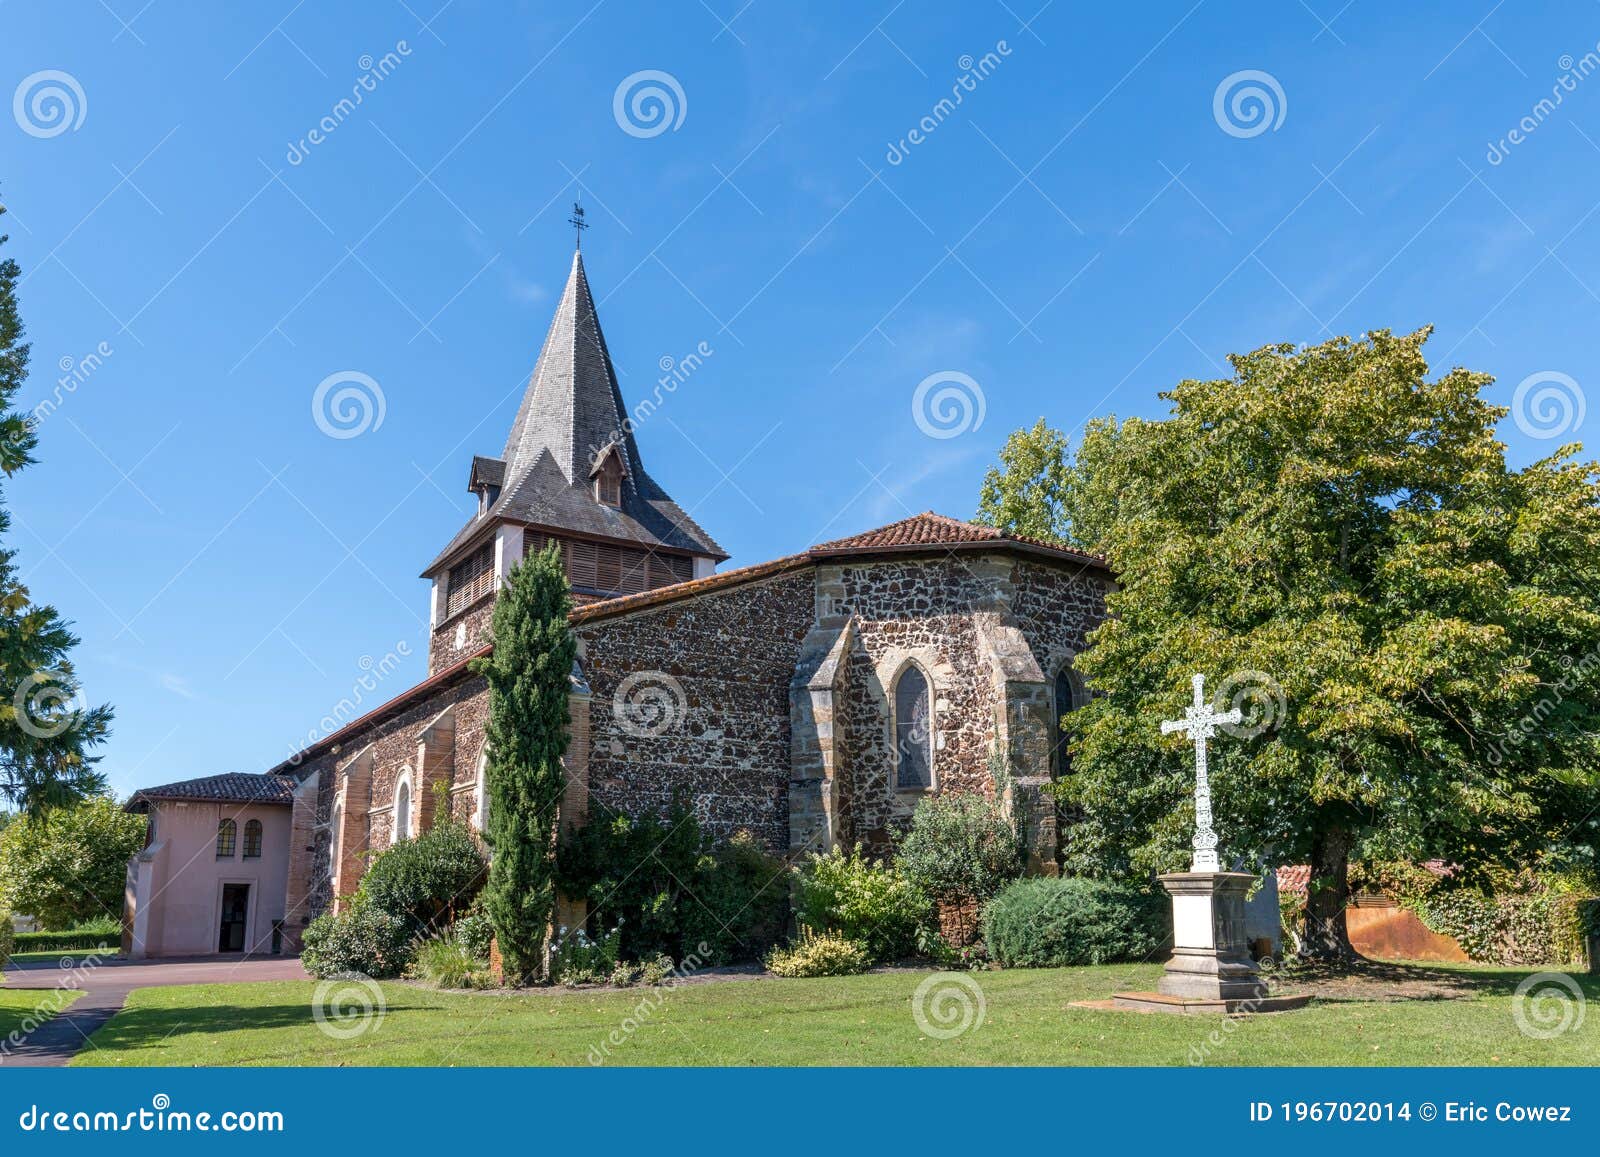 the church of pontenx, near biscarrosse in france